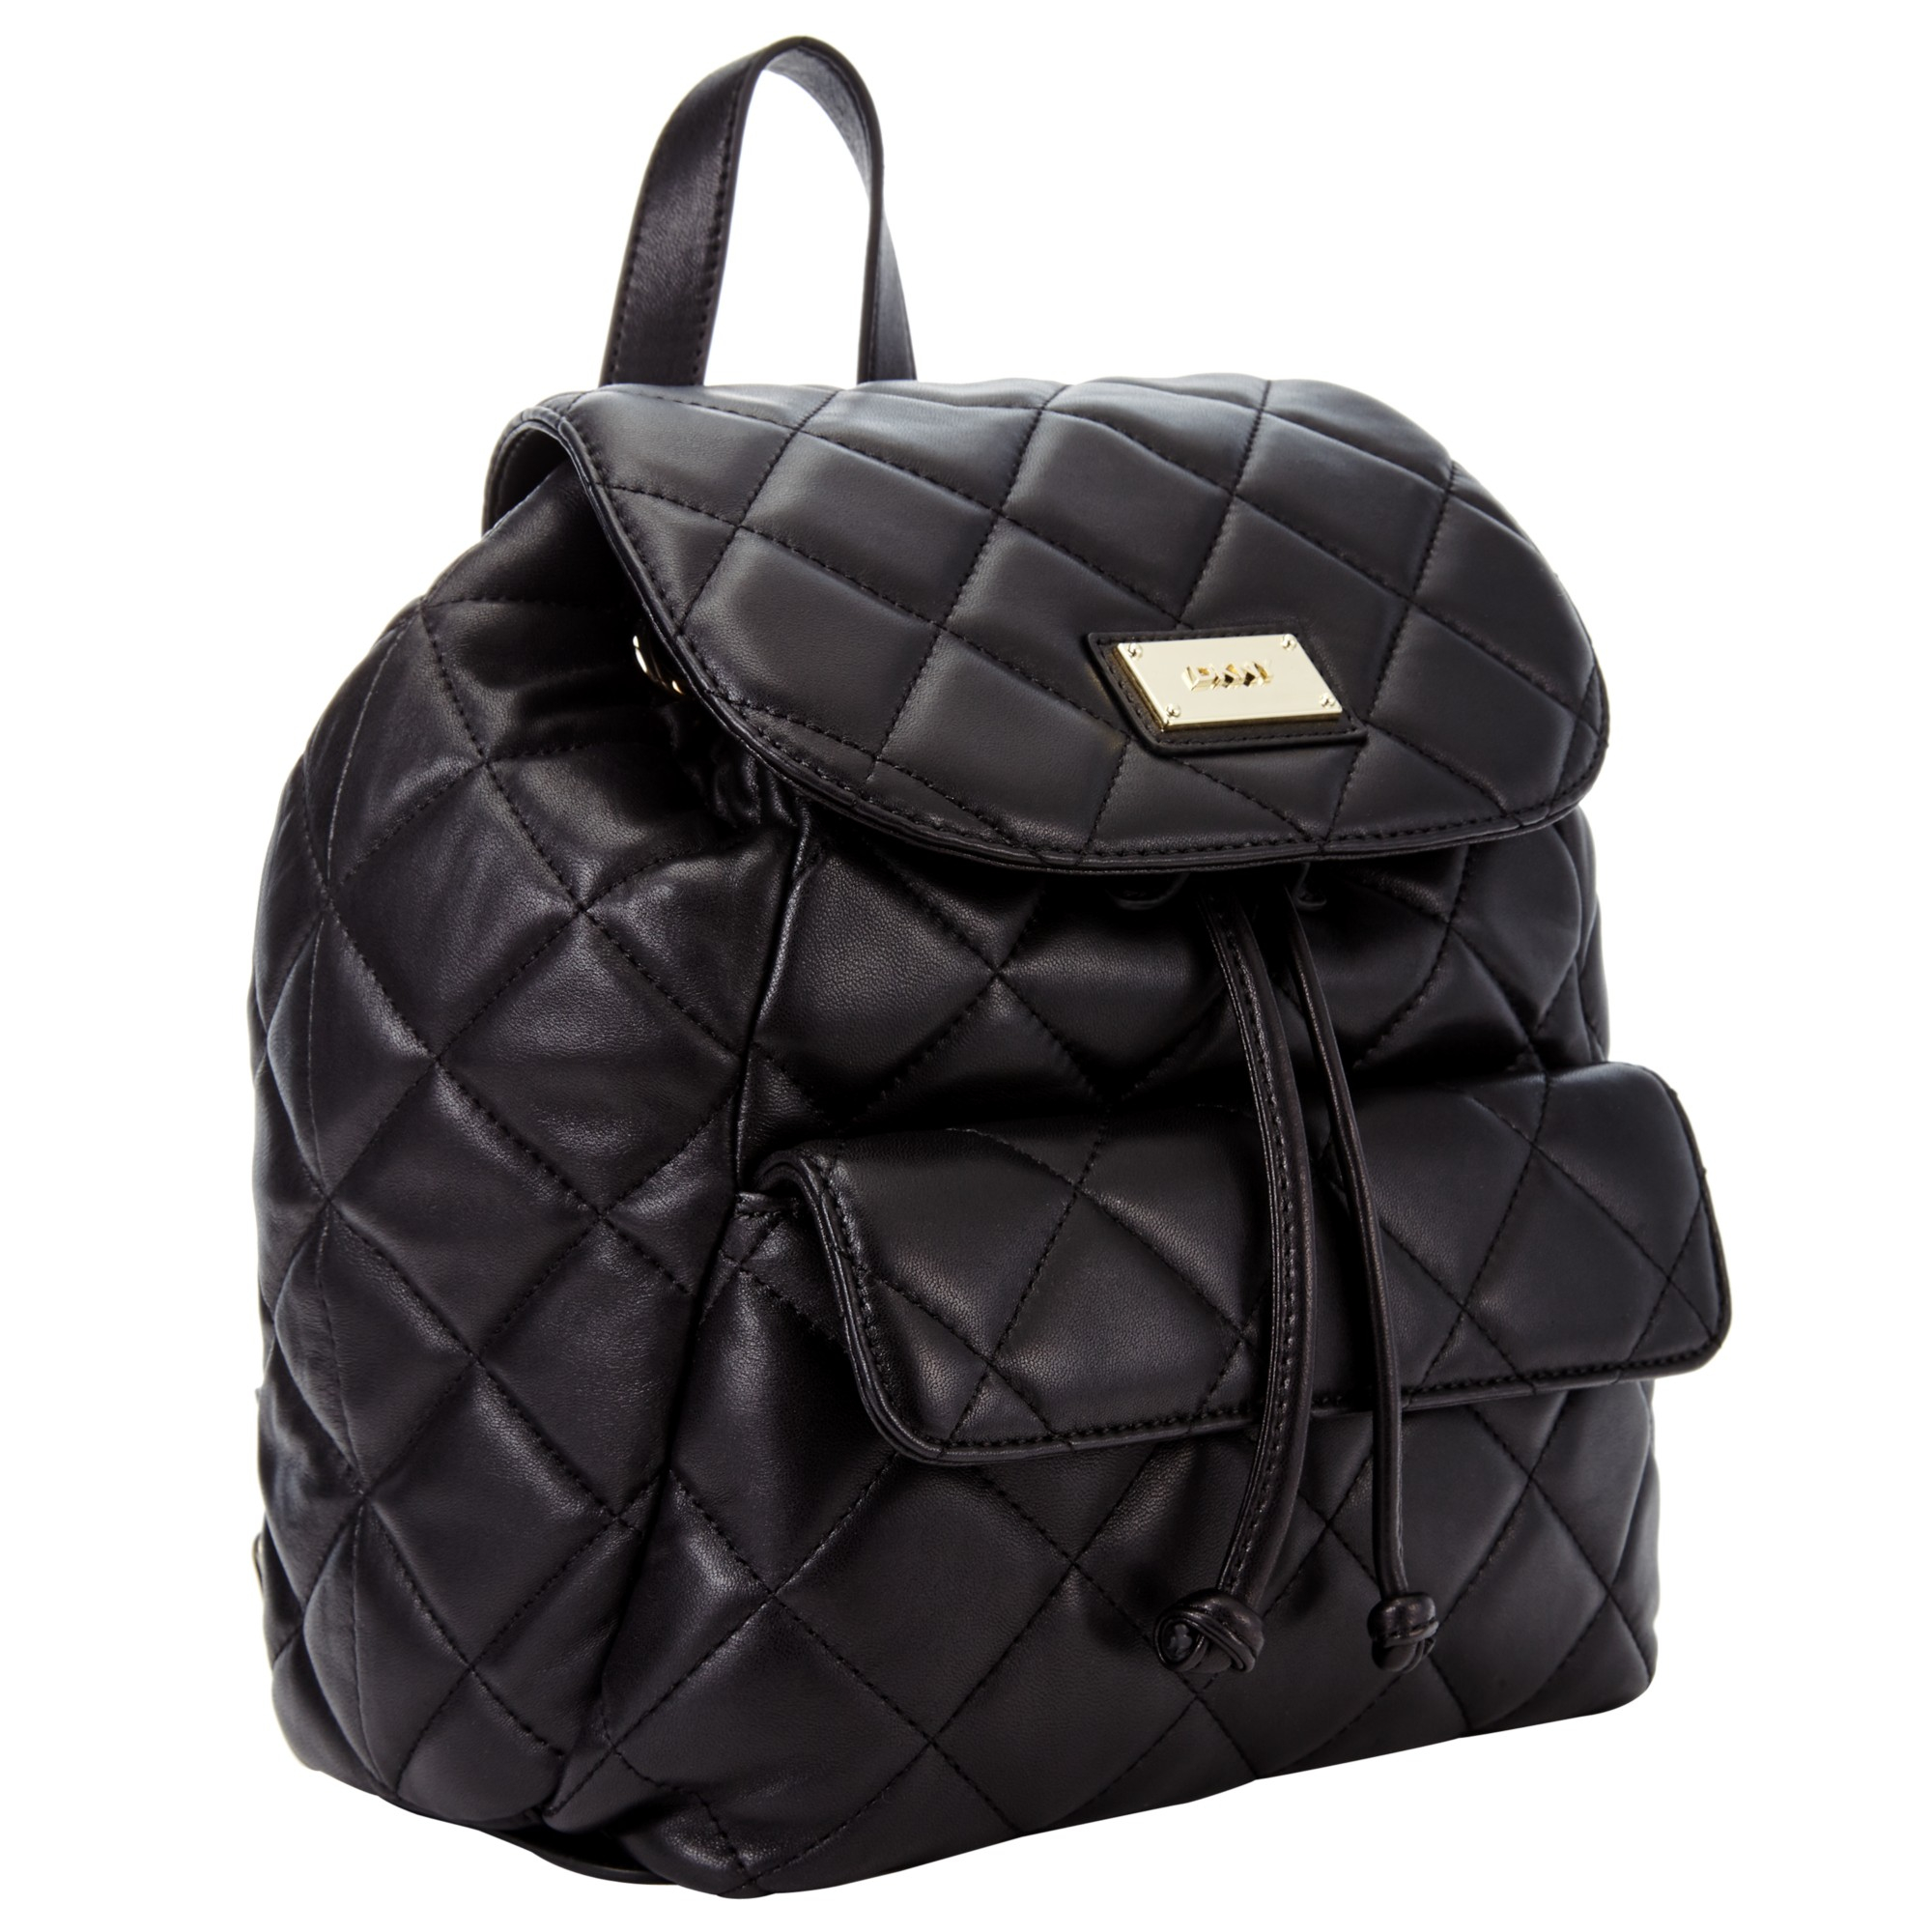 DKNY Gansevoort Quilted Leather Backpack in Black - Lyst